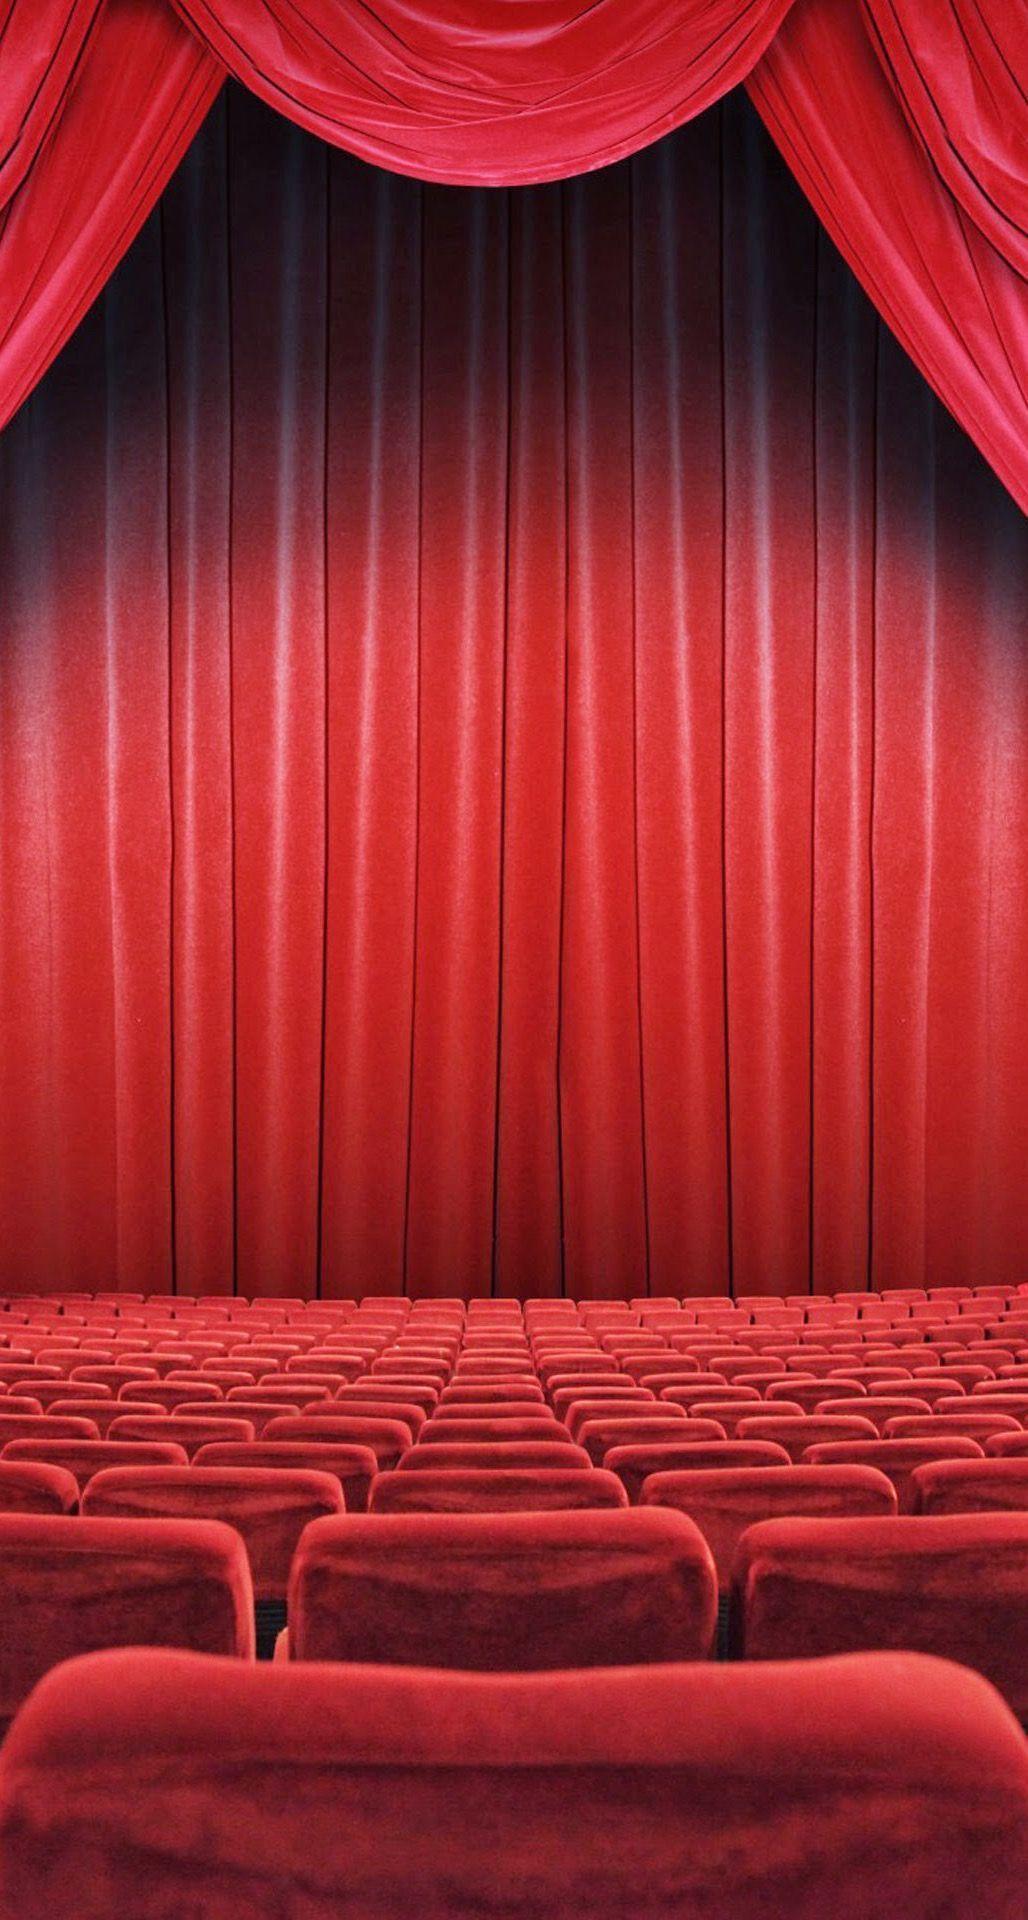 1028 x 1920 · jpeg - Movie Theater Wallpapers - Wallpaper Cave